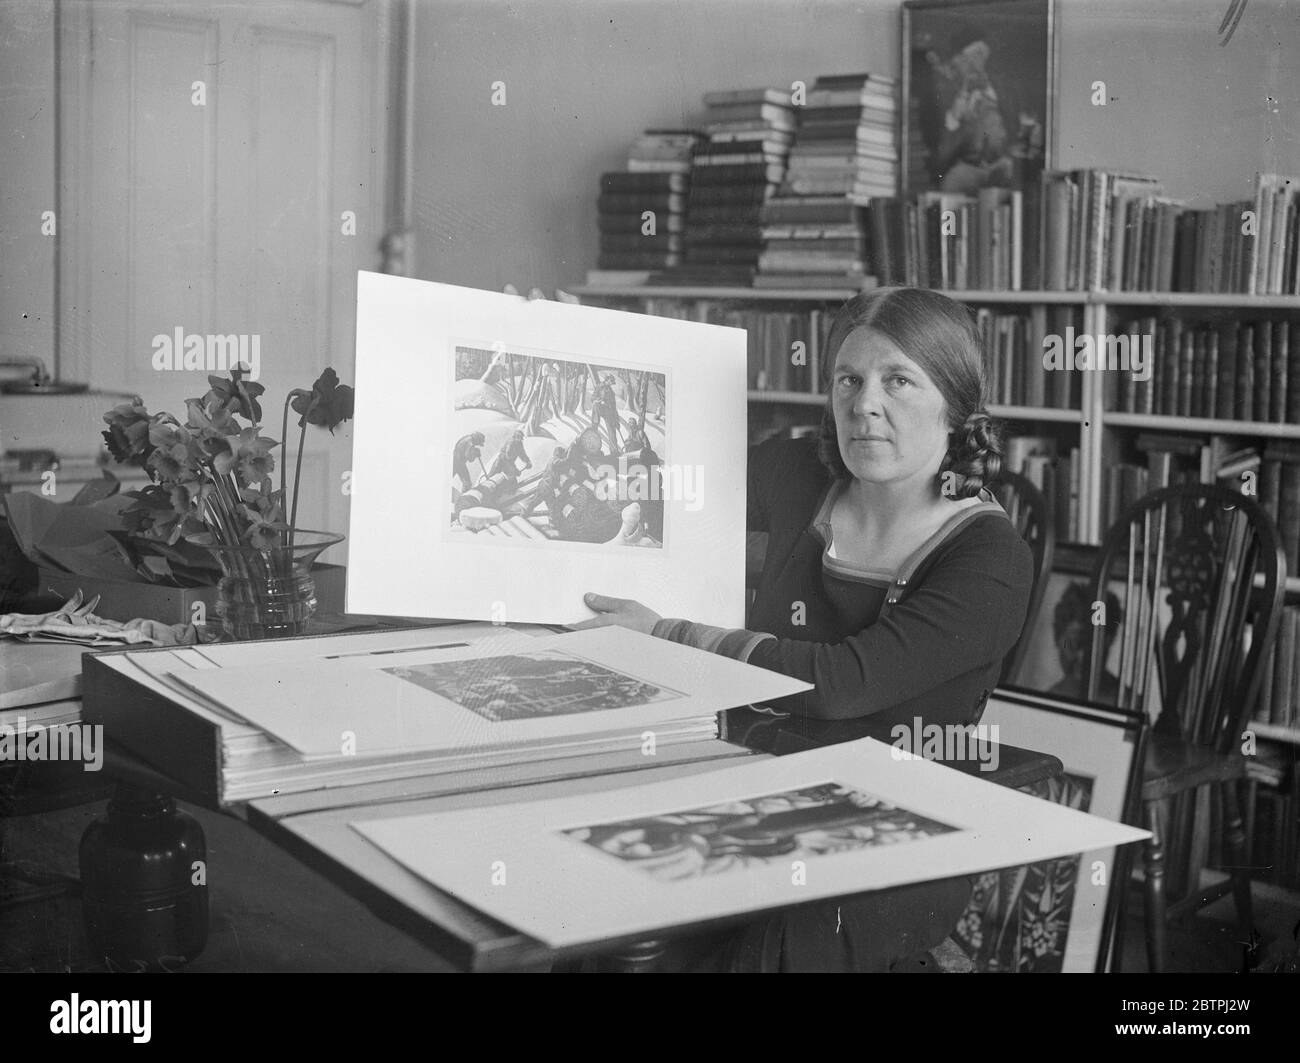 Woman artist honoured . Three women , Clare Leighton , Vanessa Bell and Winifred Nicholson, are included in the list of 24 contemporary British artists whose work will represent this country at the nineteenth International art exhibition at Venice this summer . Photo shows , Miss Clare Leighton with some of her work which will be exhibited , photographed in her London home . These are wood engravings some of which were done in Canadian lumber camps . 28 March 1934 Stock Photo